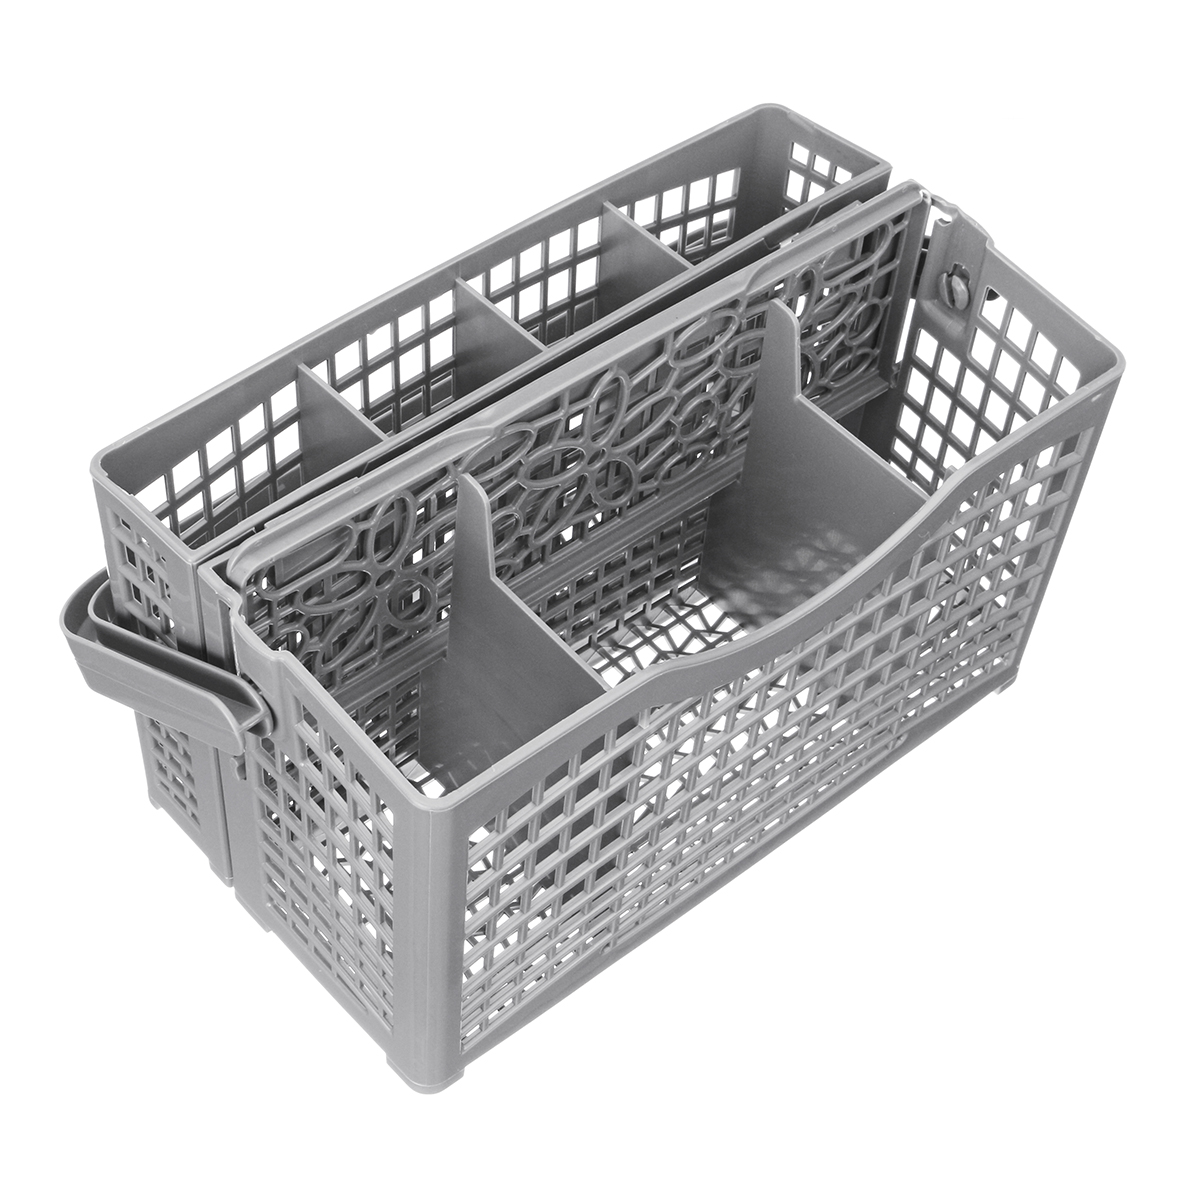 2-In-1-Universal-Dish-Washer-Cutlery-Basket-for-Maytag-Whirpool-LG-Samsung-1579731-7